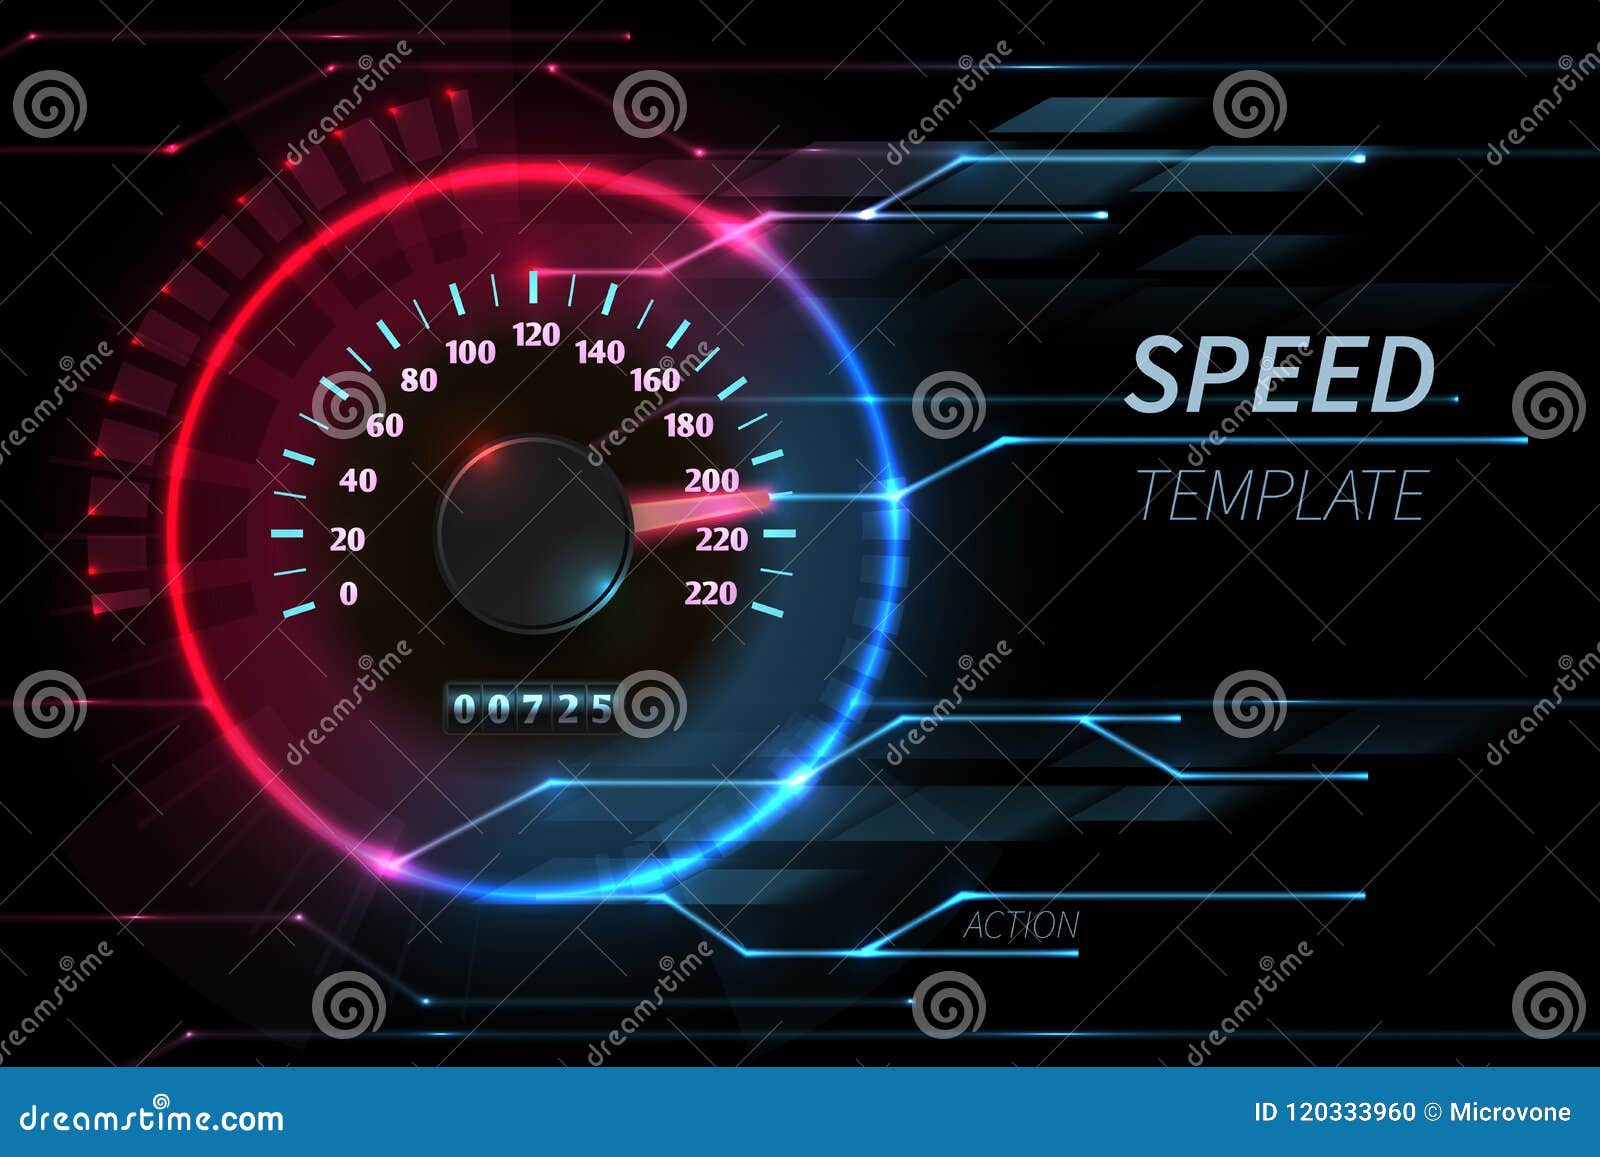 speed motion line  abstract tech background with car racing speedometer